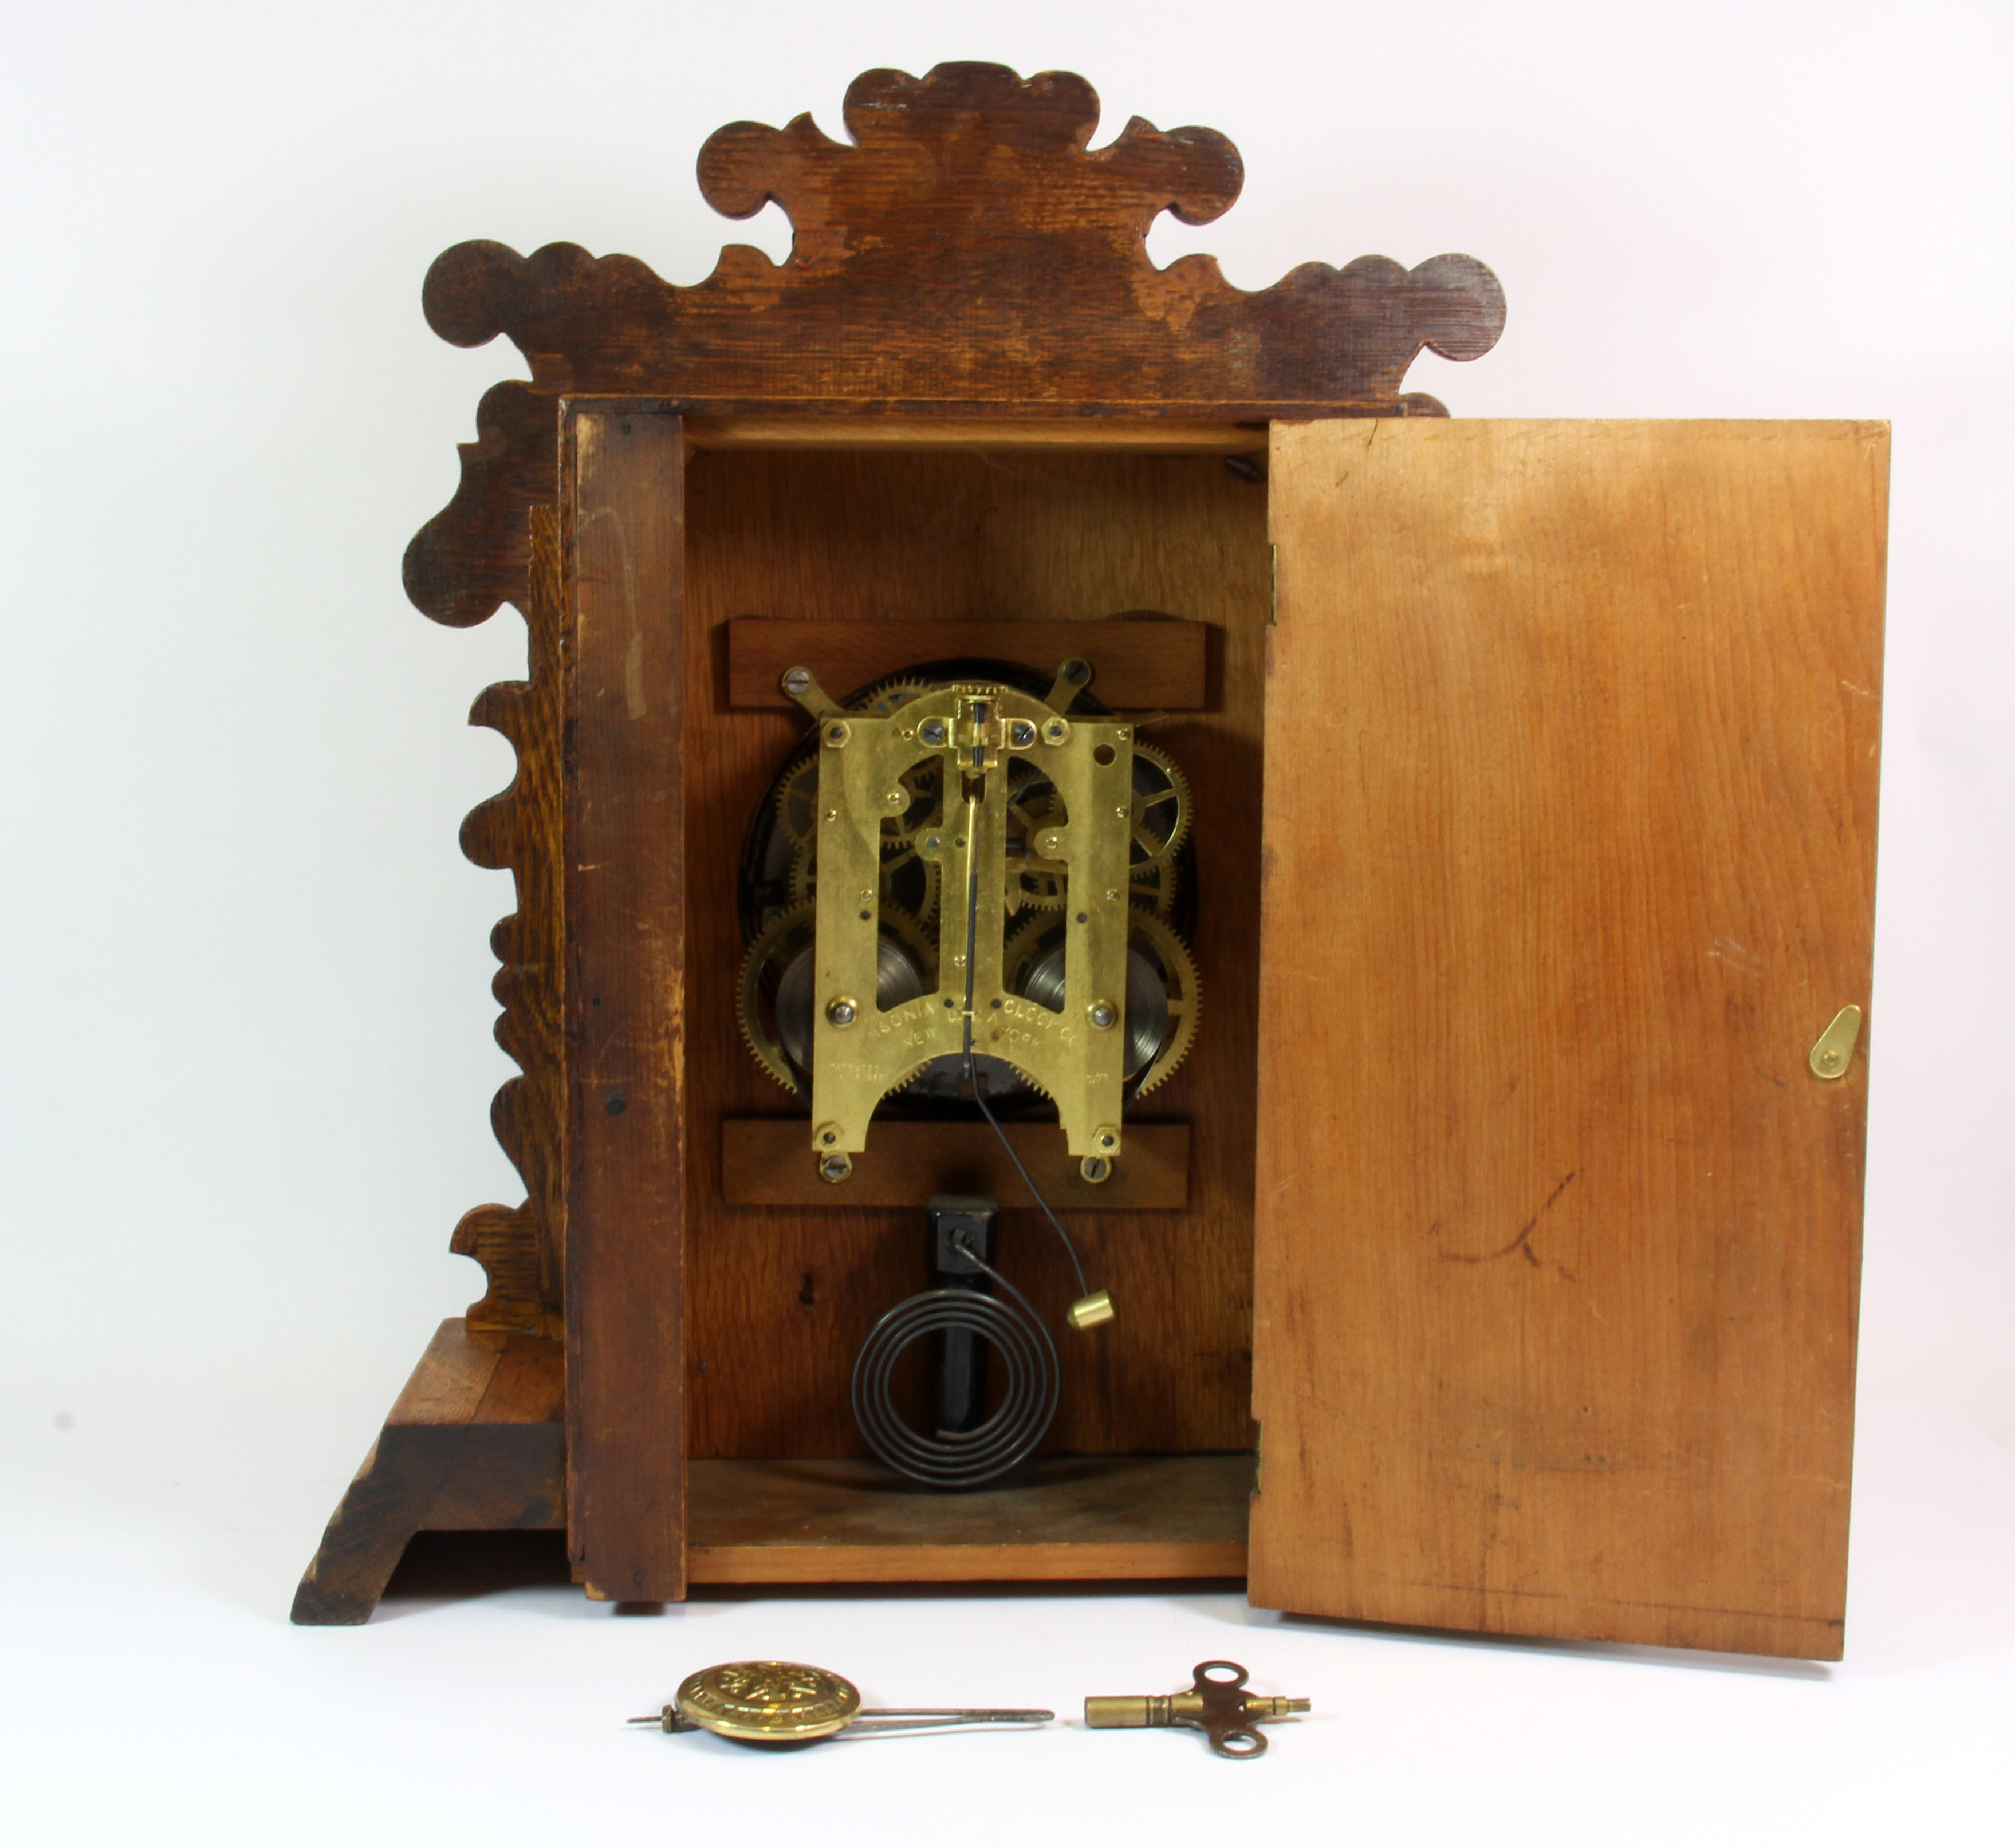 A 19th century oak mantle clock, H. 41cm, understood to be in working order. - Image 2 of 3